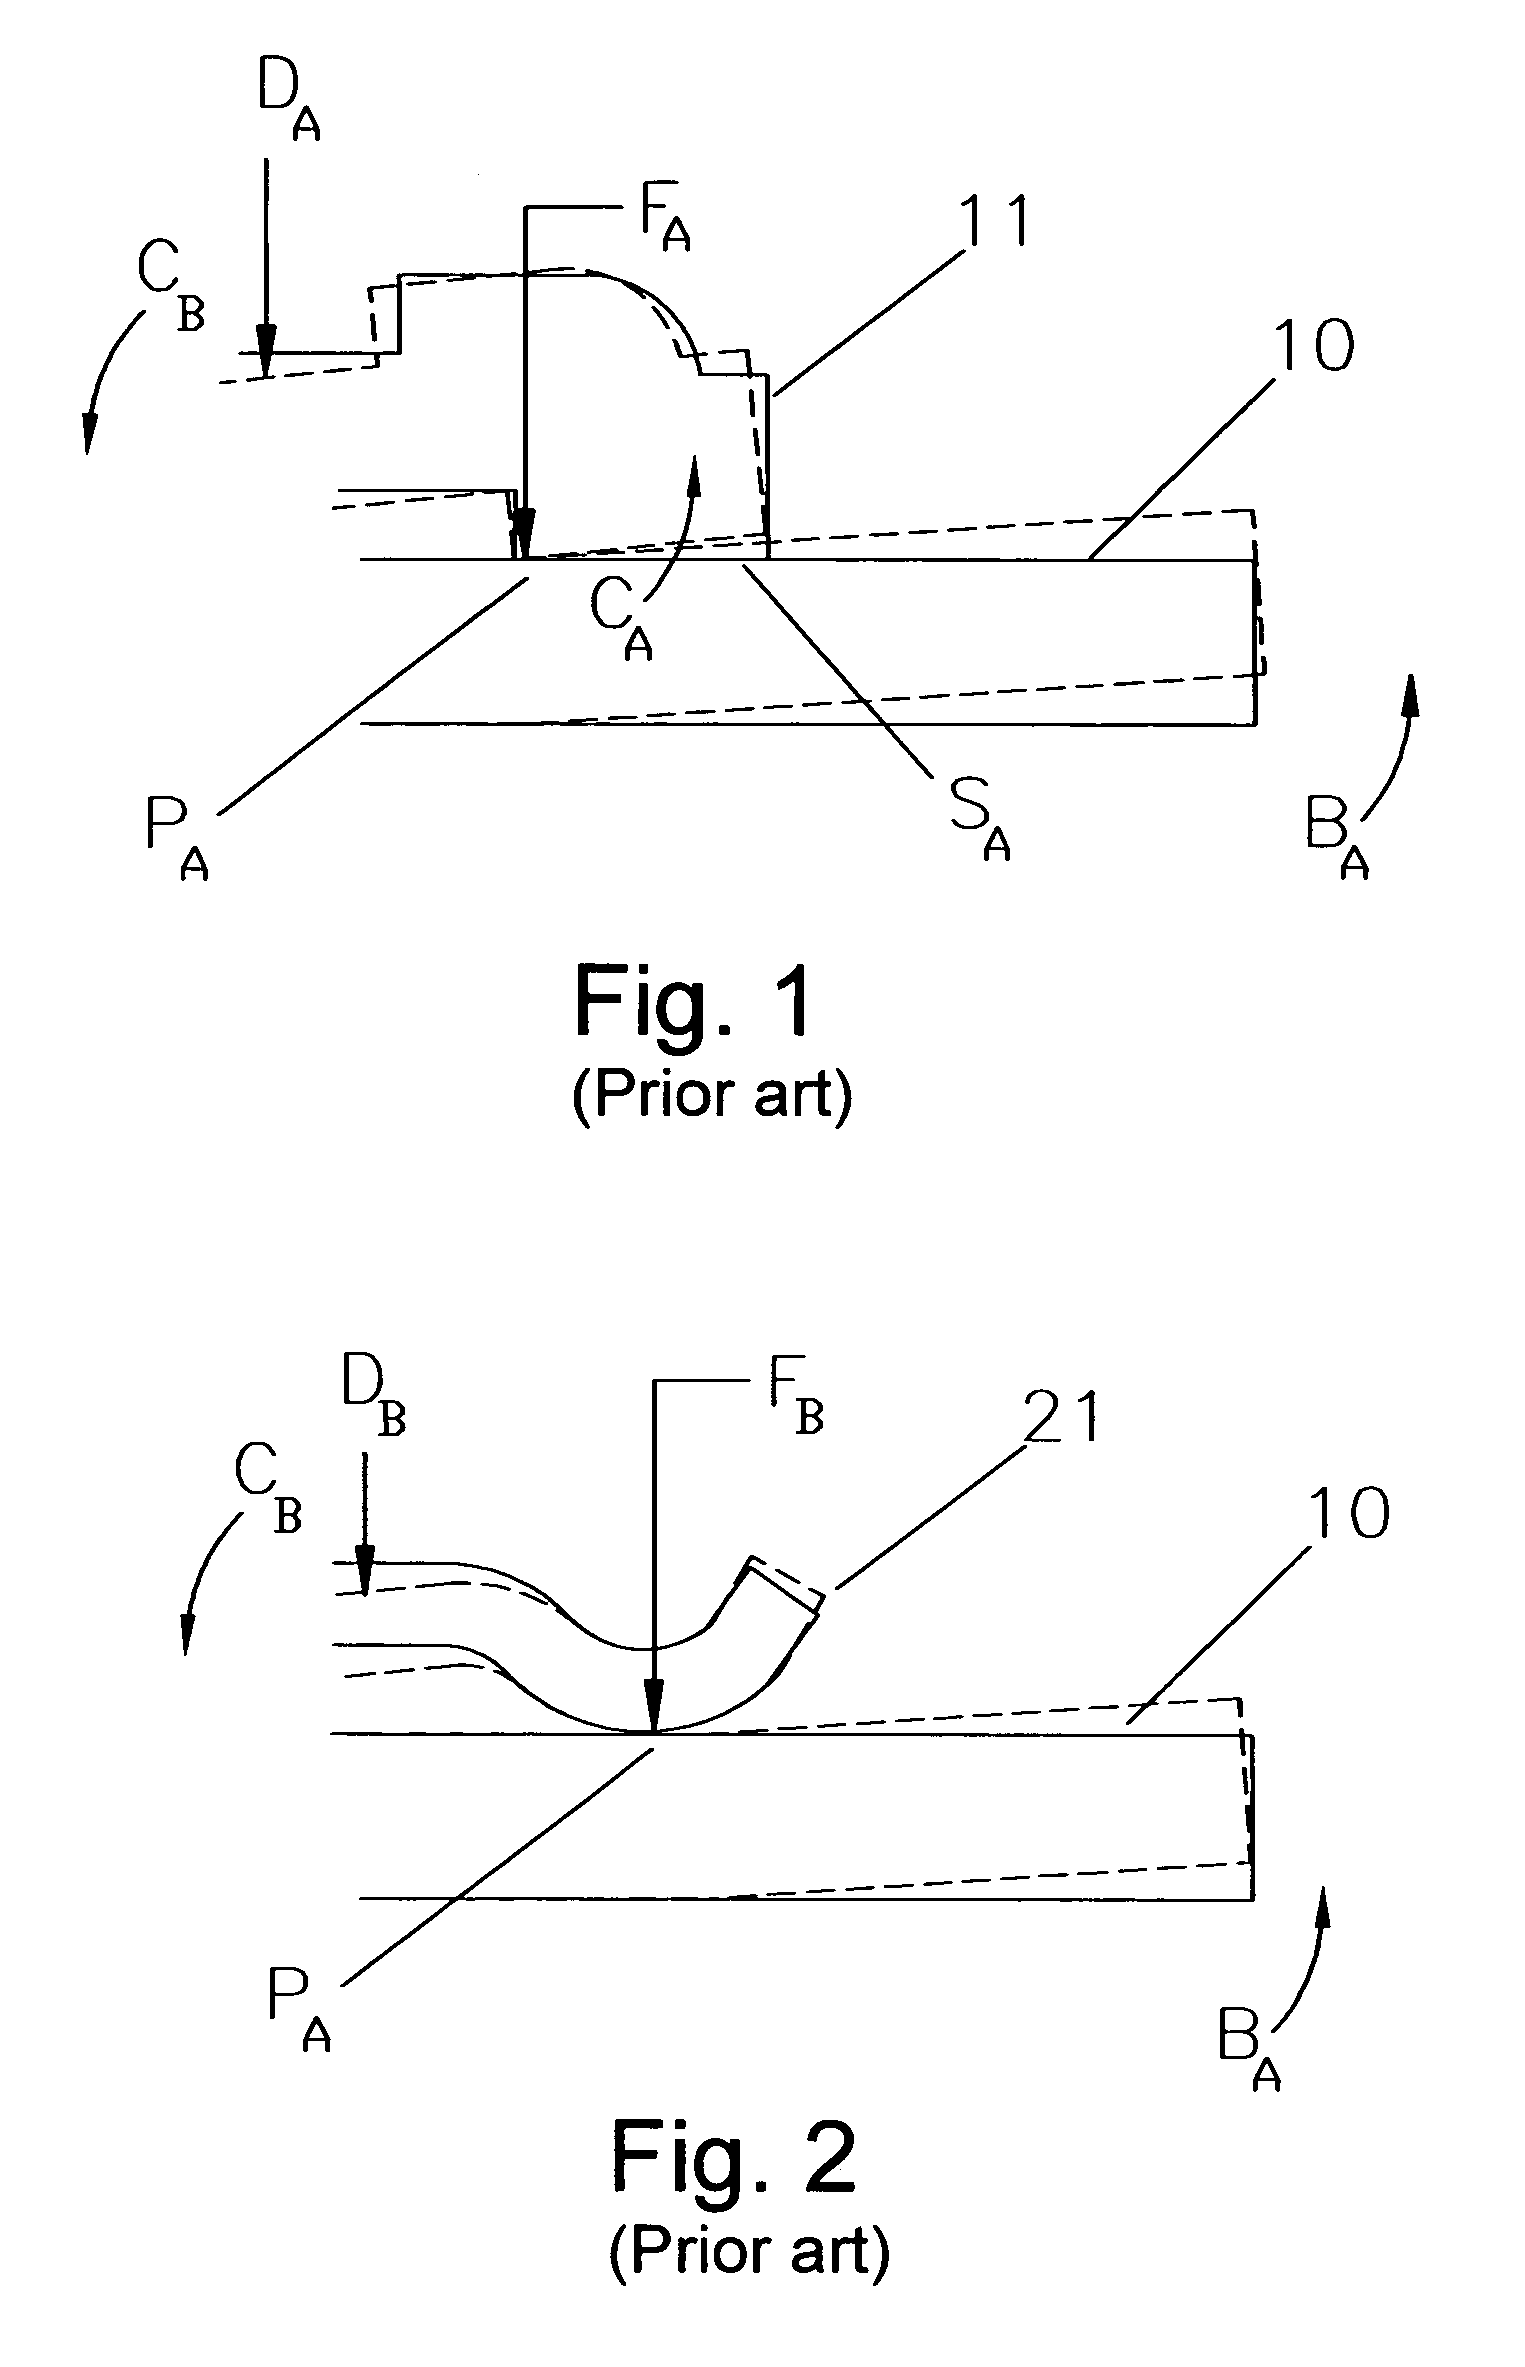 Offset angle disc clamp